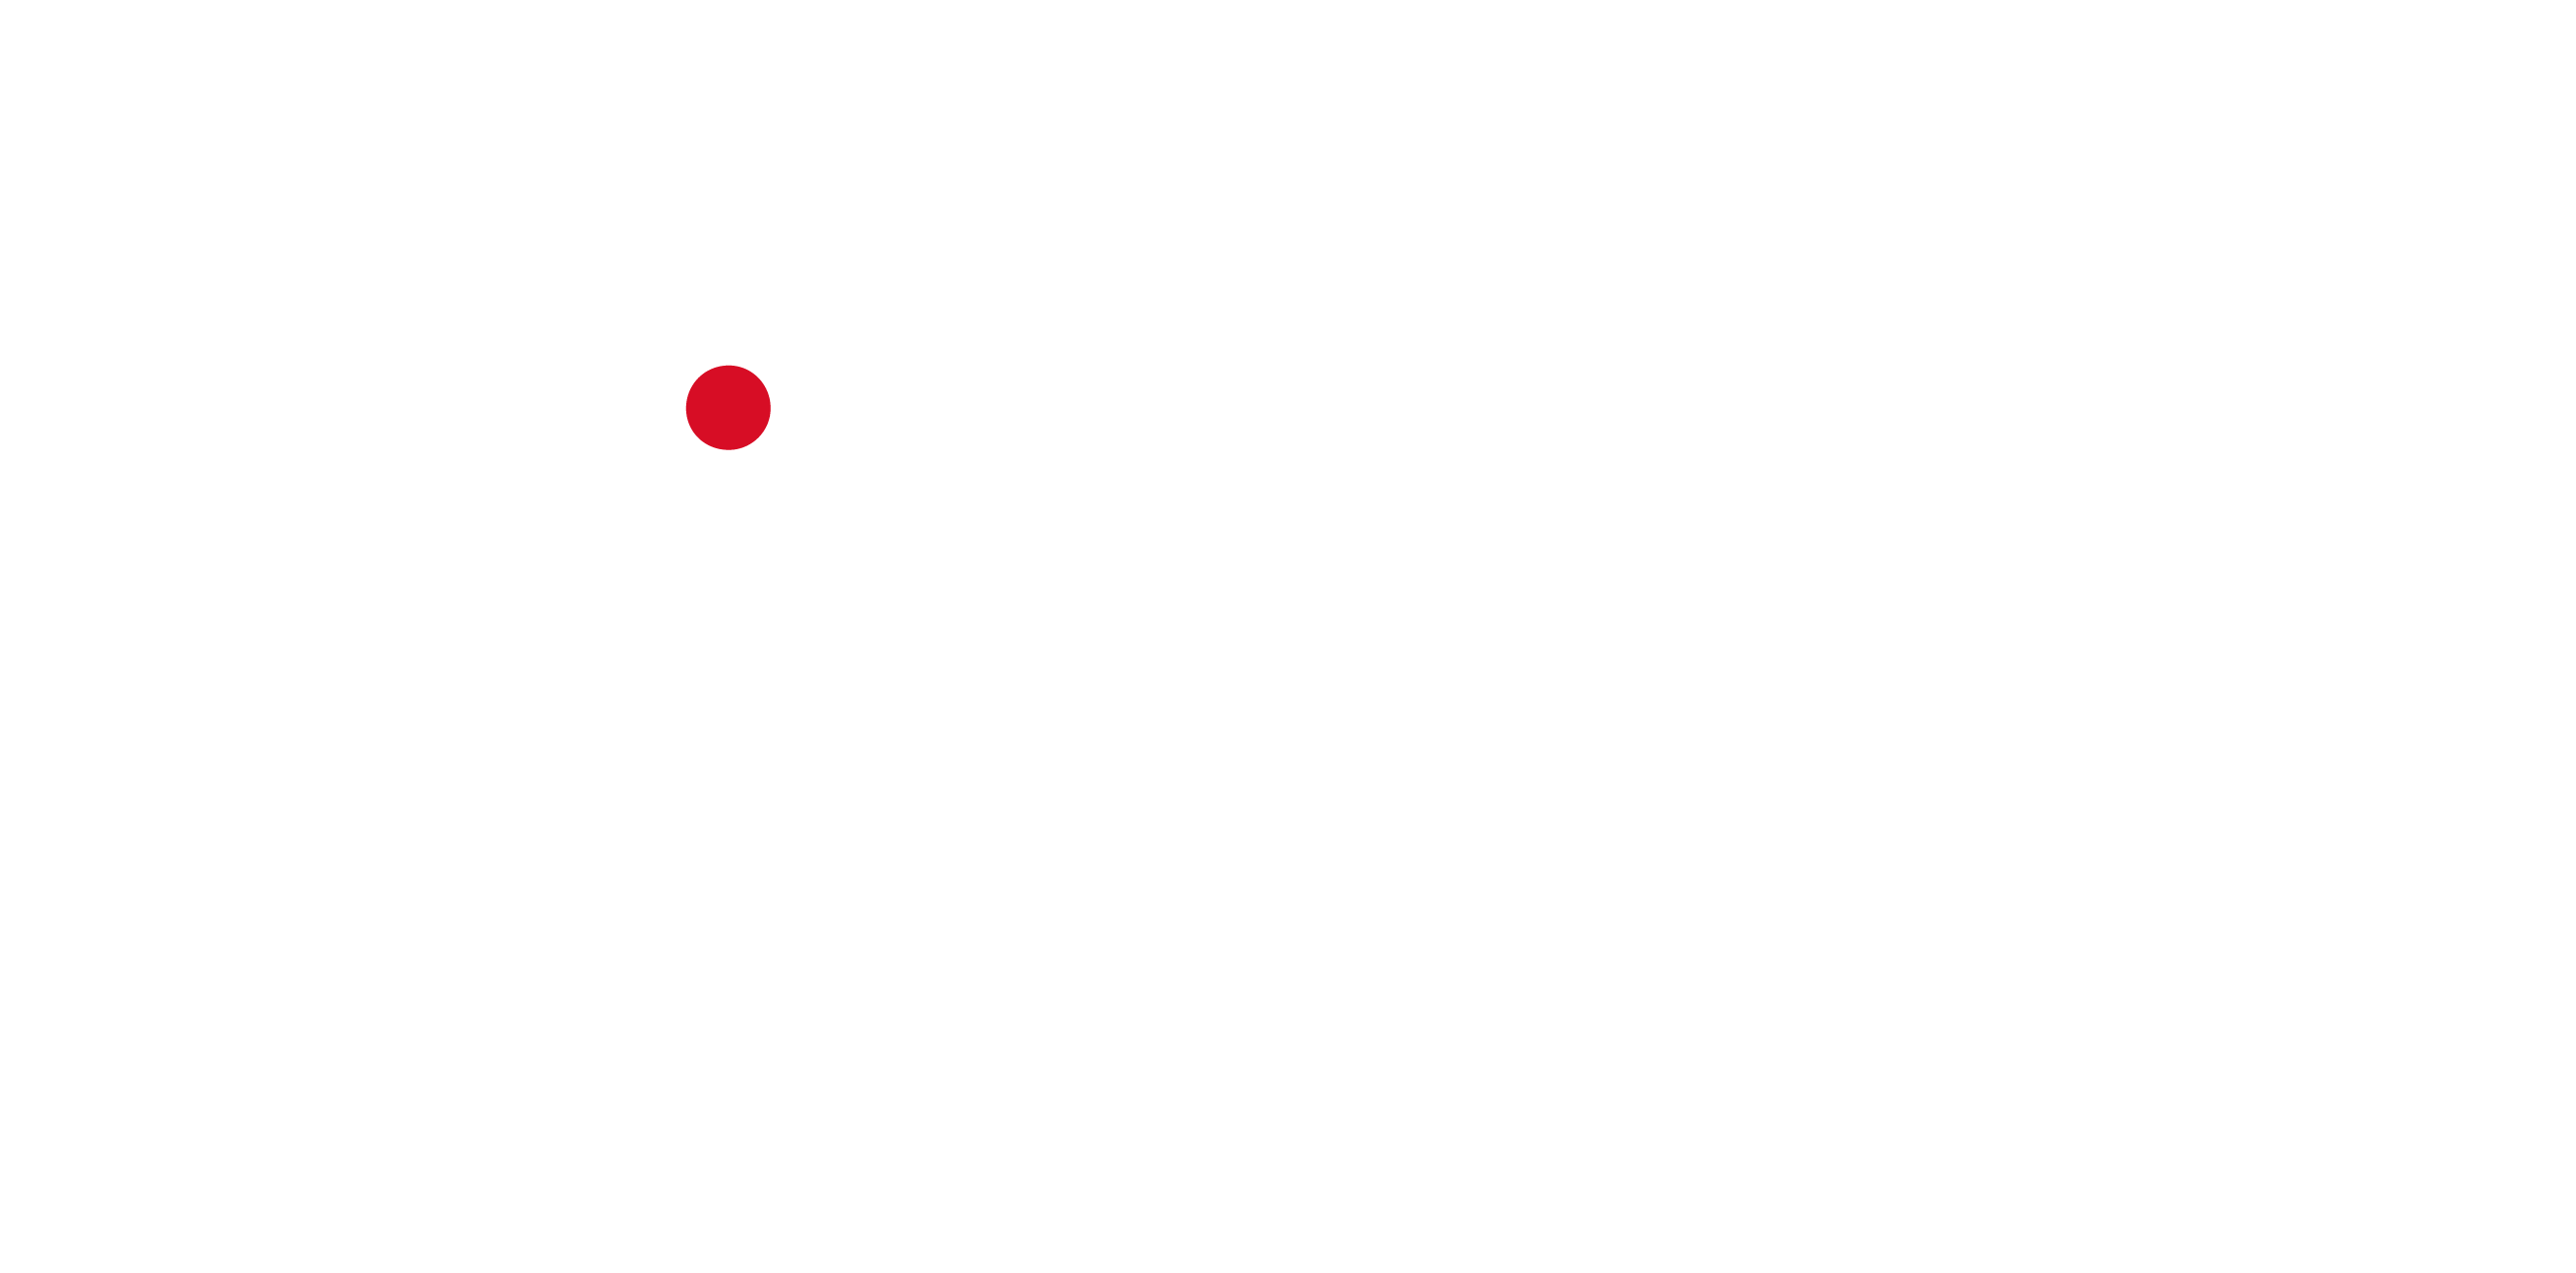 A member of S.F. Holding